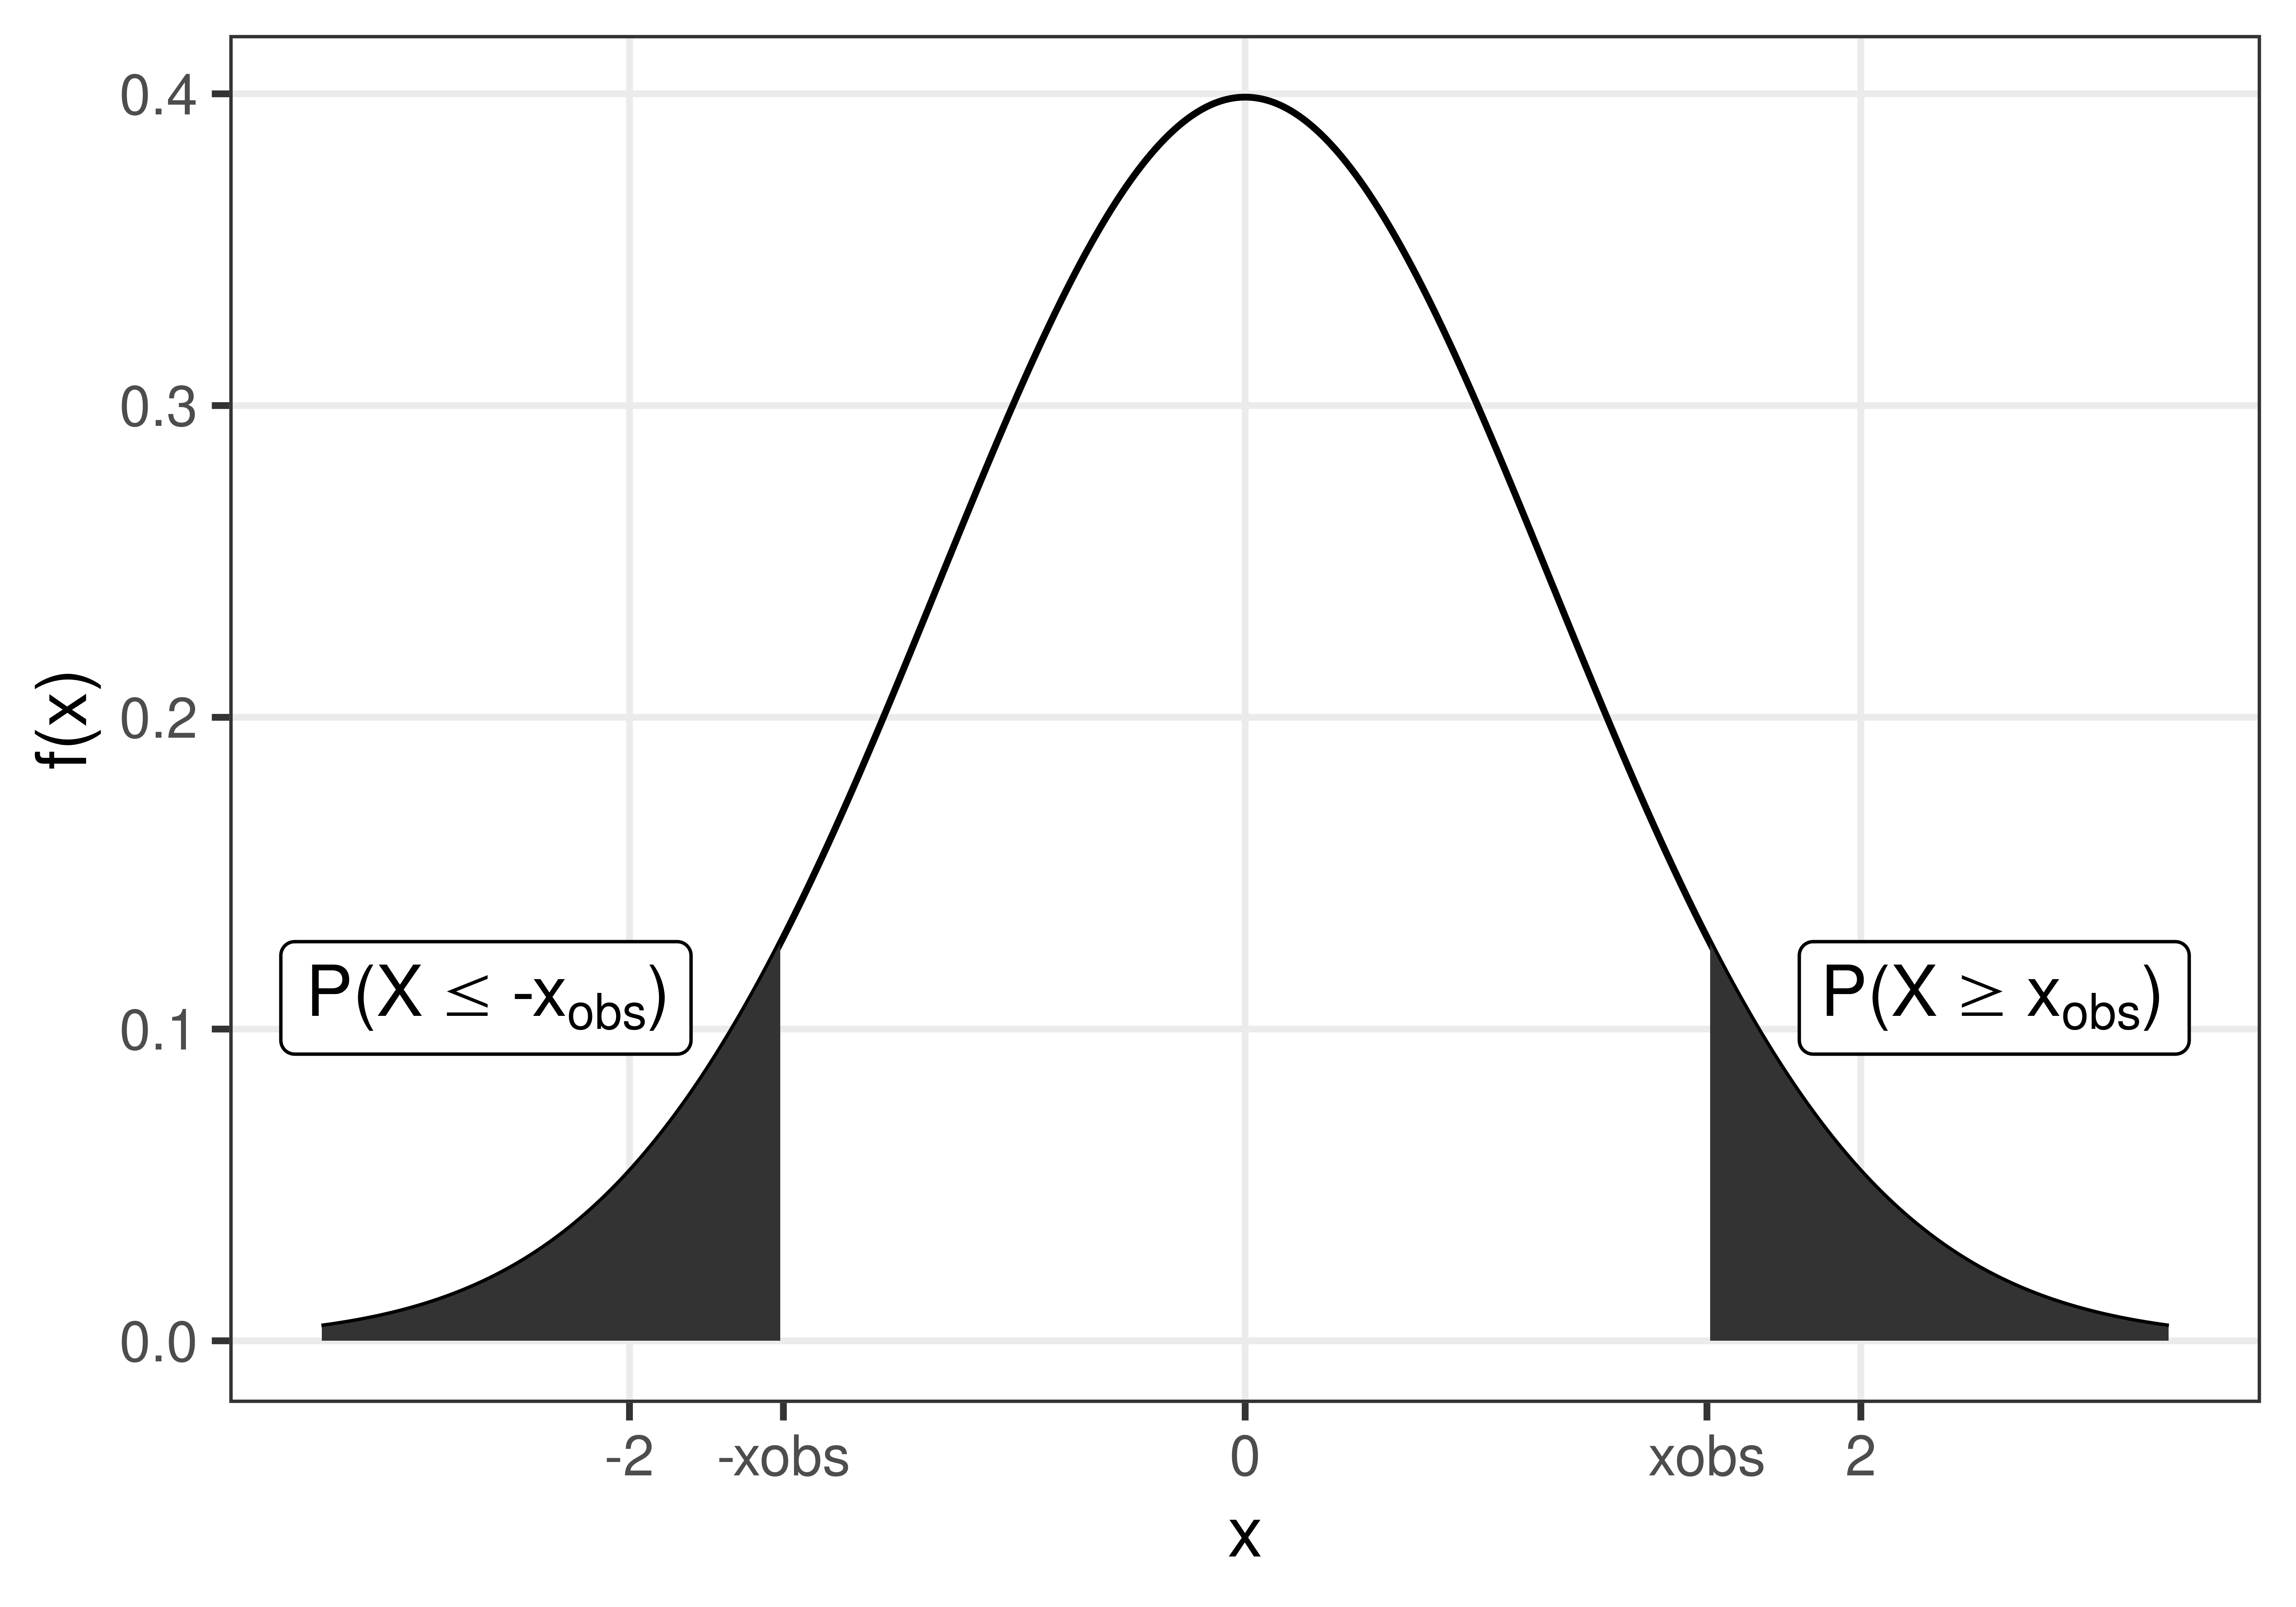 The p-value is the probability to observe $x_{obs}$ or something more extreme, if the null hypothesis is true.